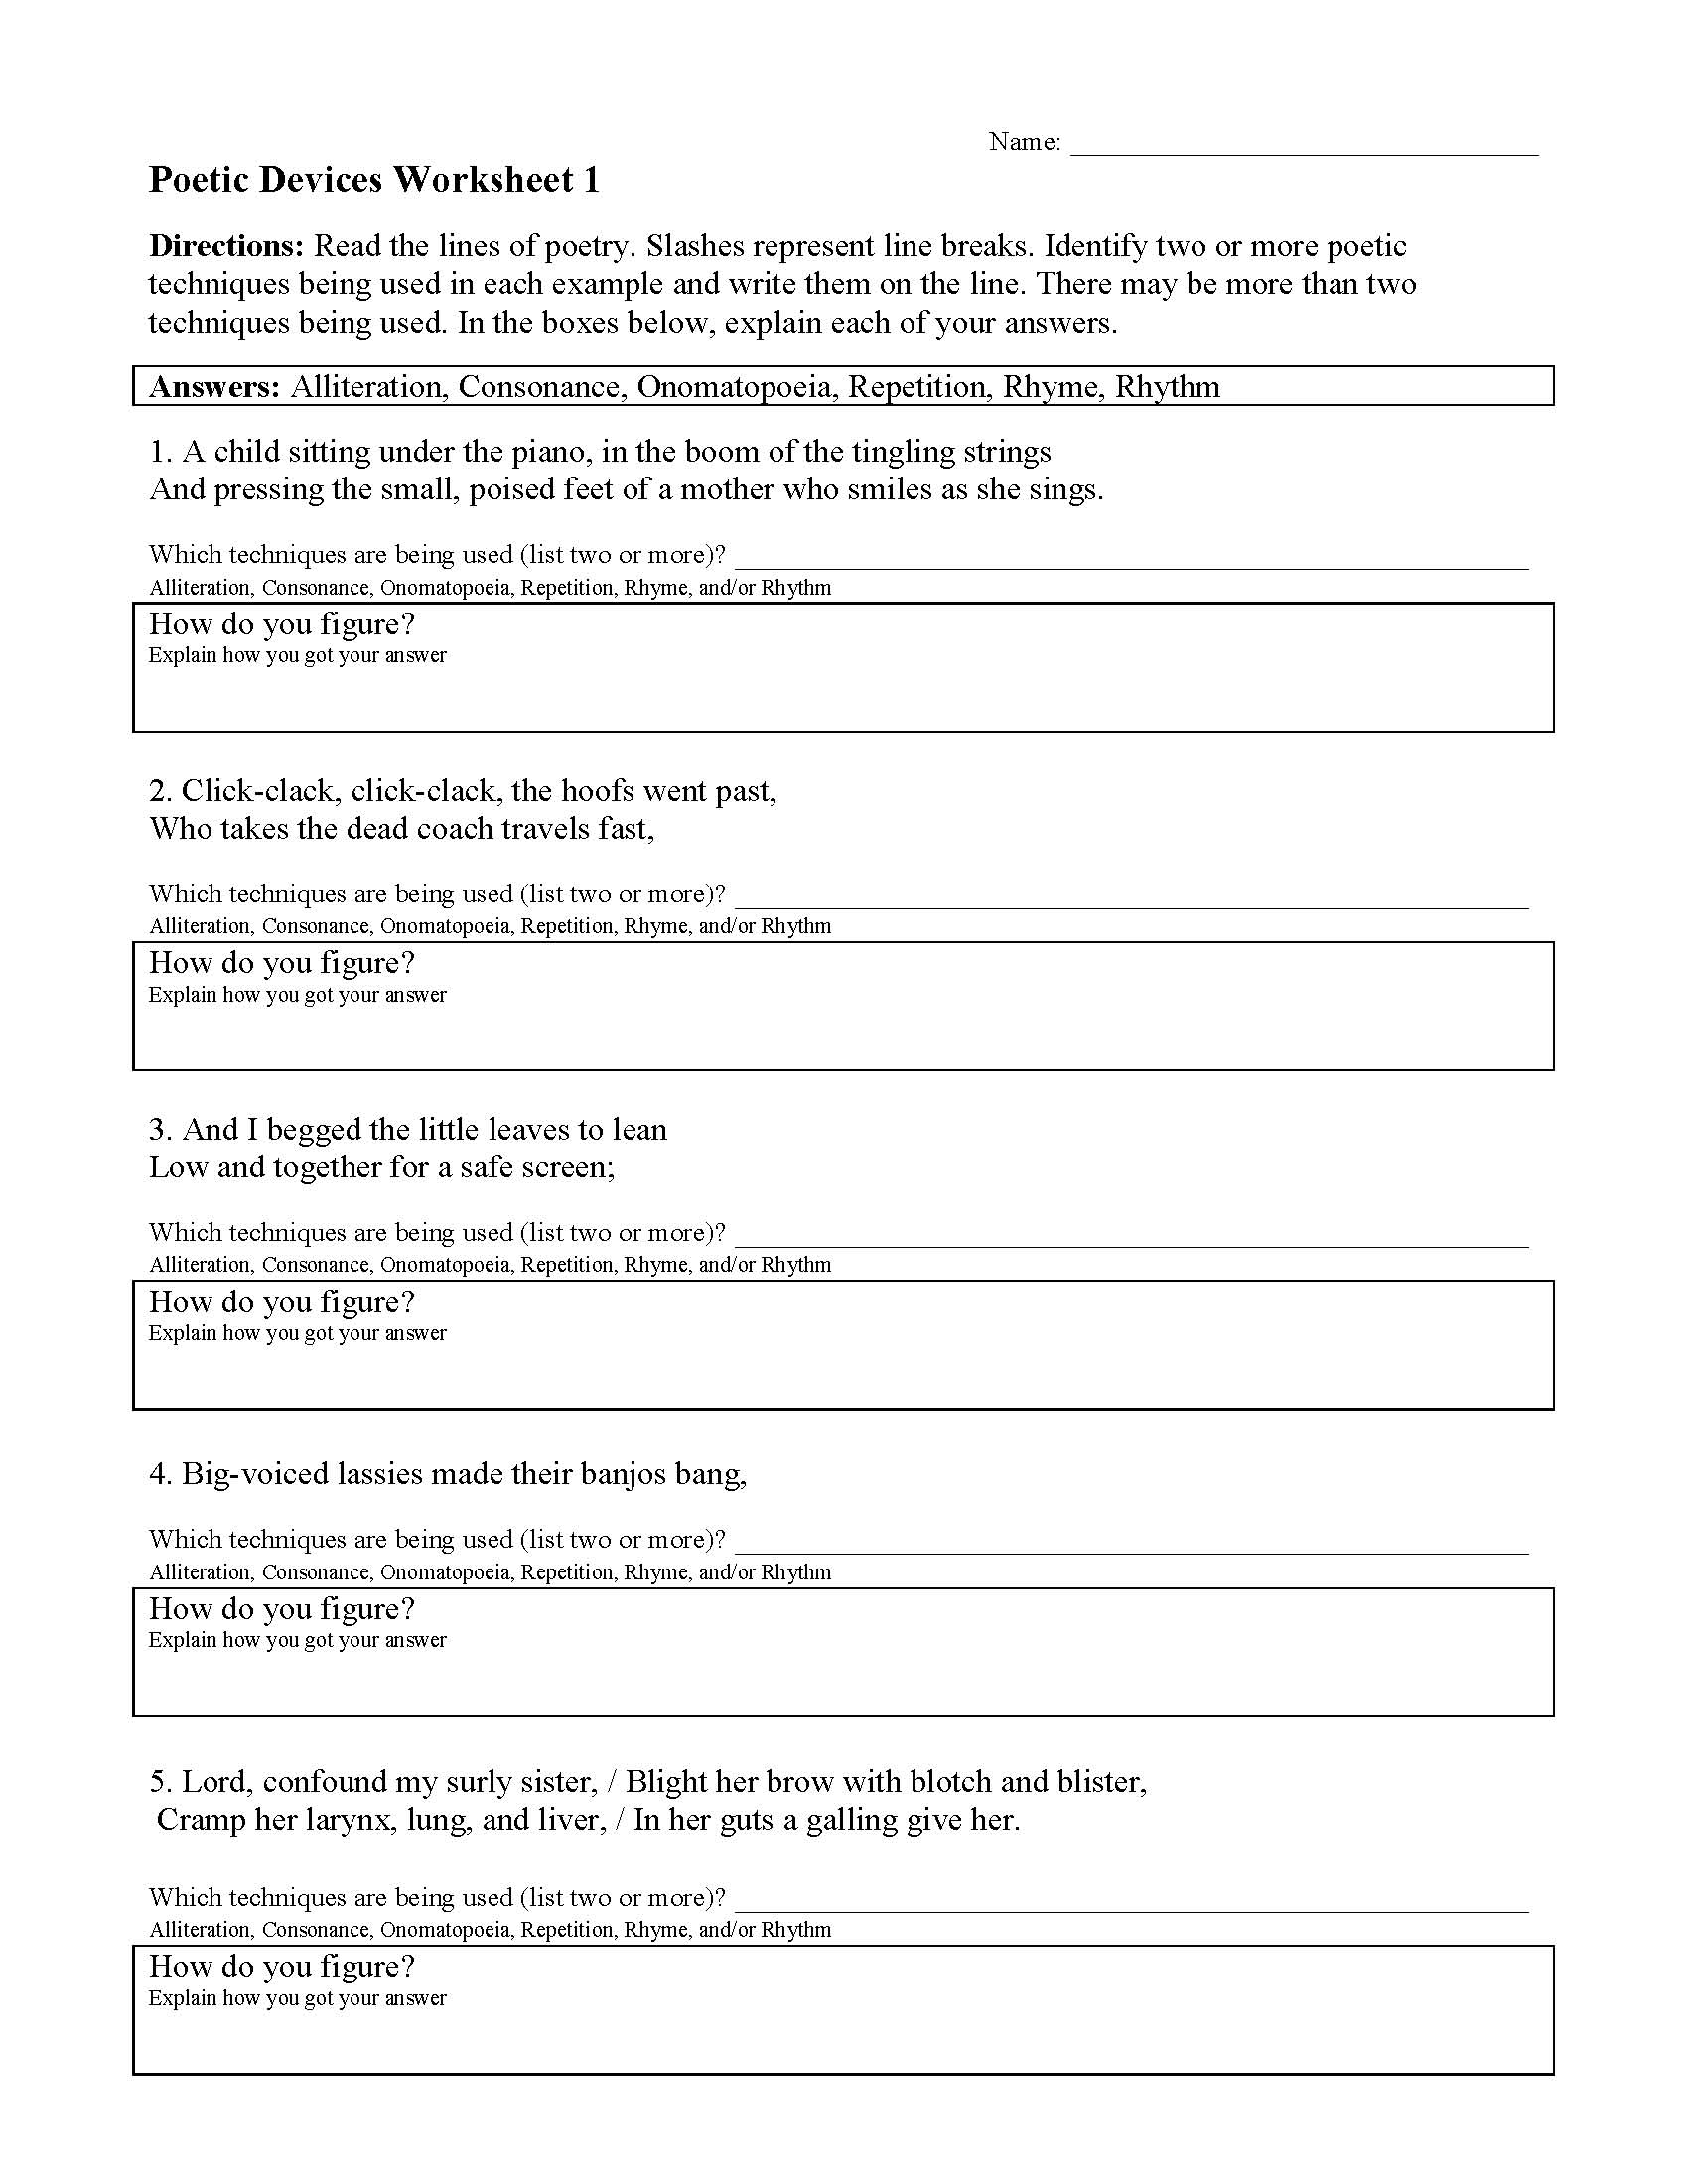 Poetic Devices Worksheets & Activities  Figurative Language Inside Literary Devices Worksheet Pdf